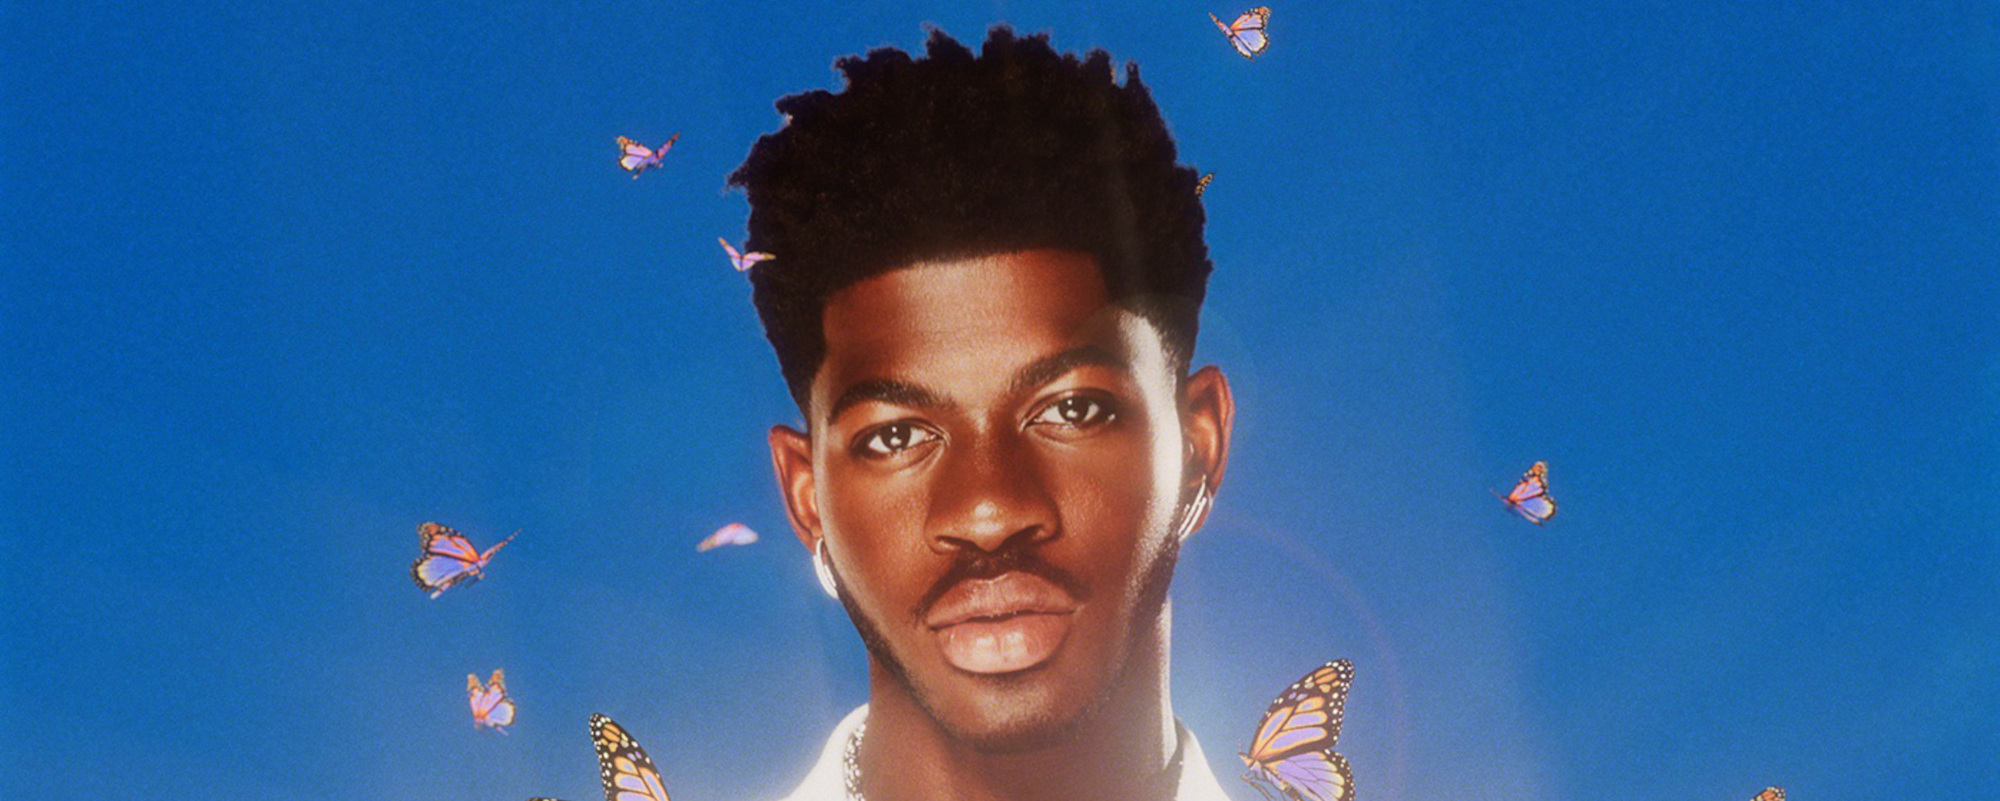 3 Years After the Release of “Old Town Road,” Lil Nas X Embarks on His First-Ever Tour